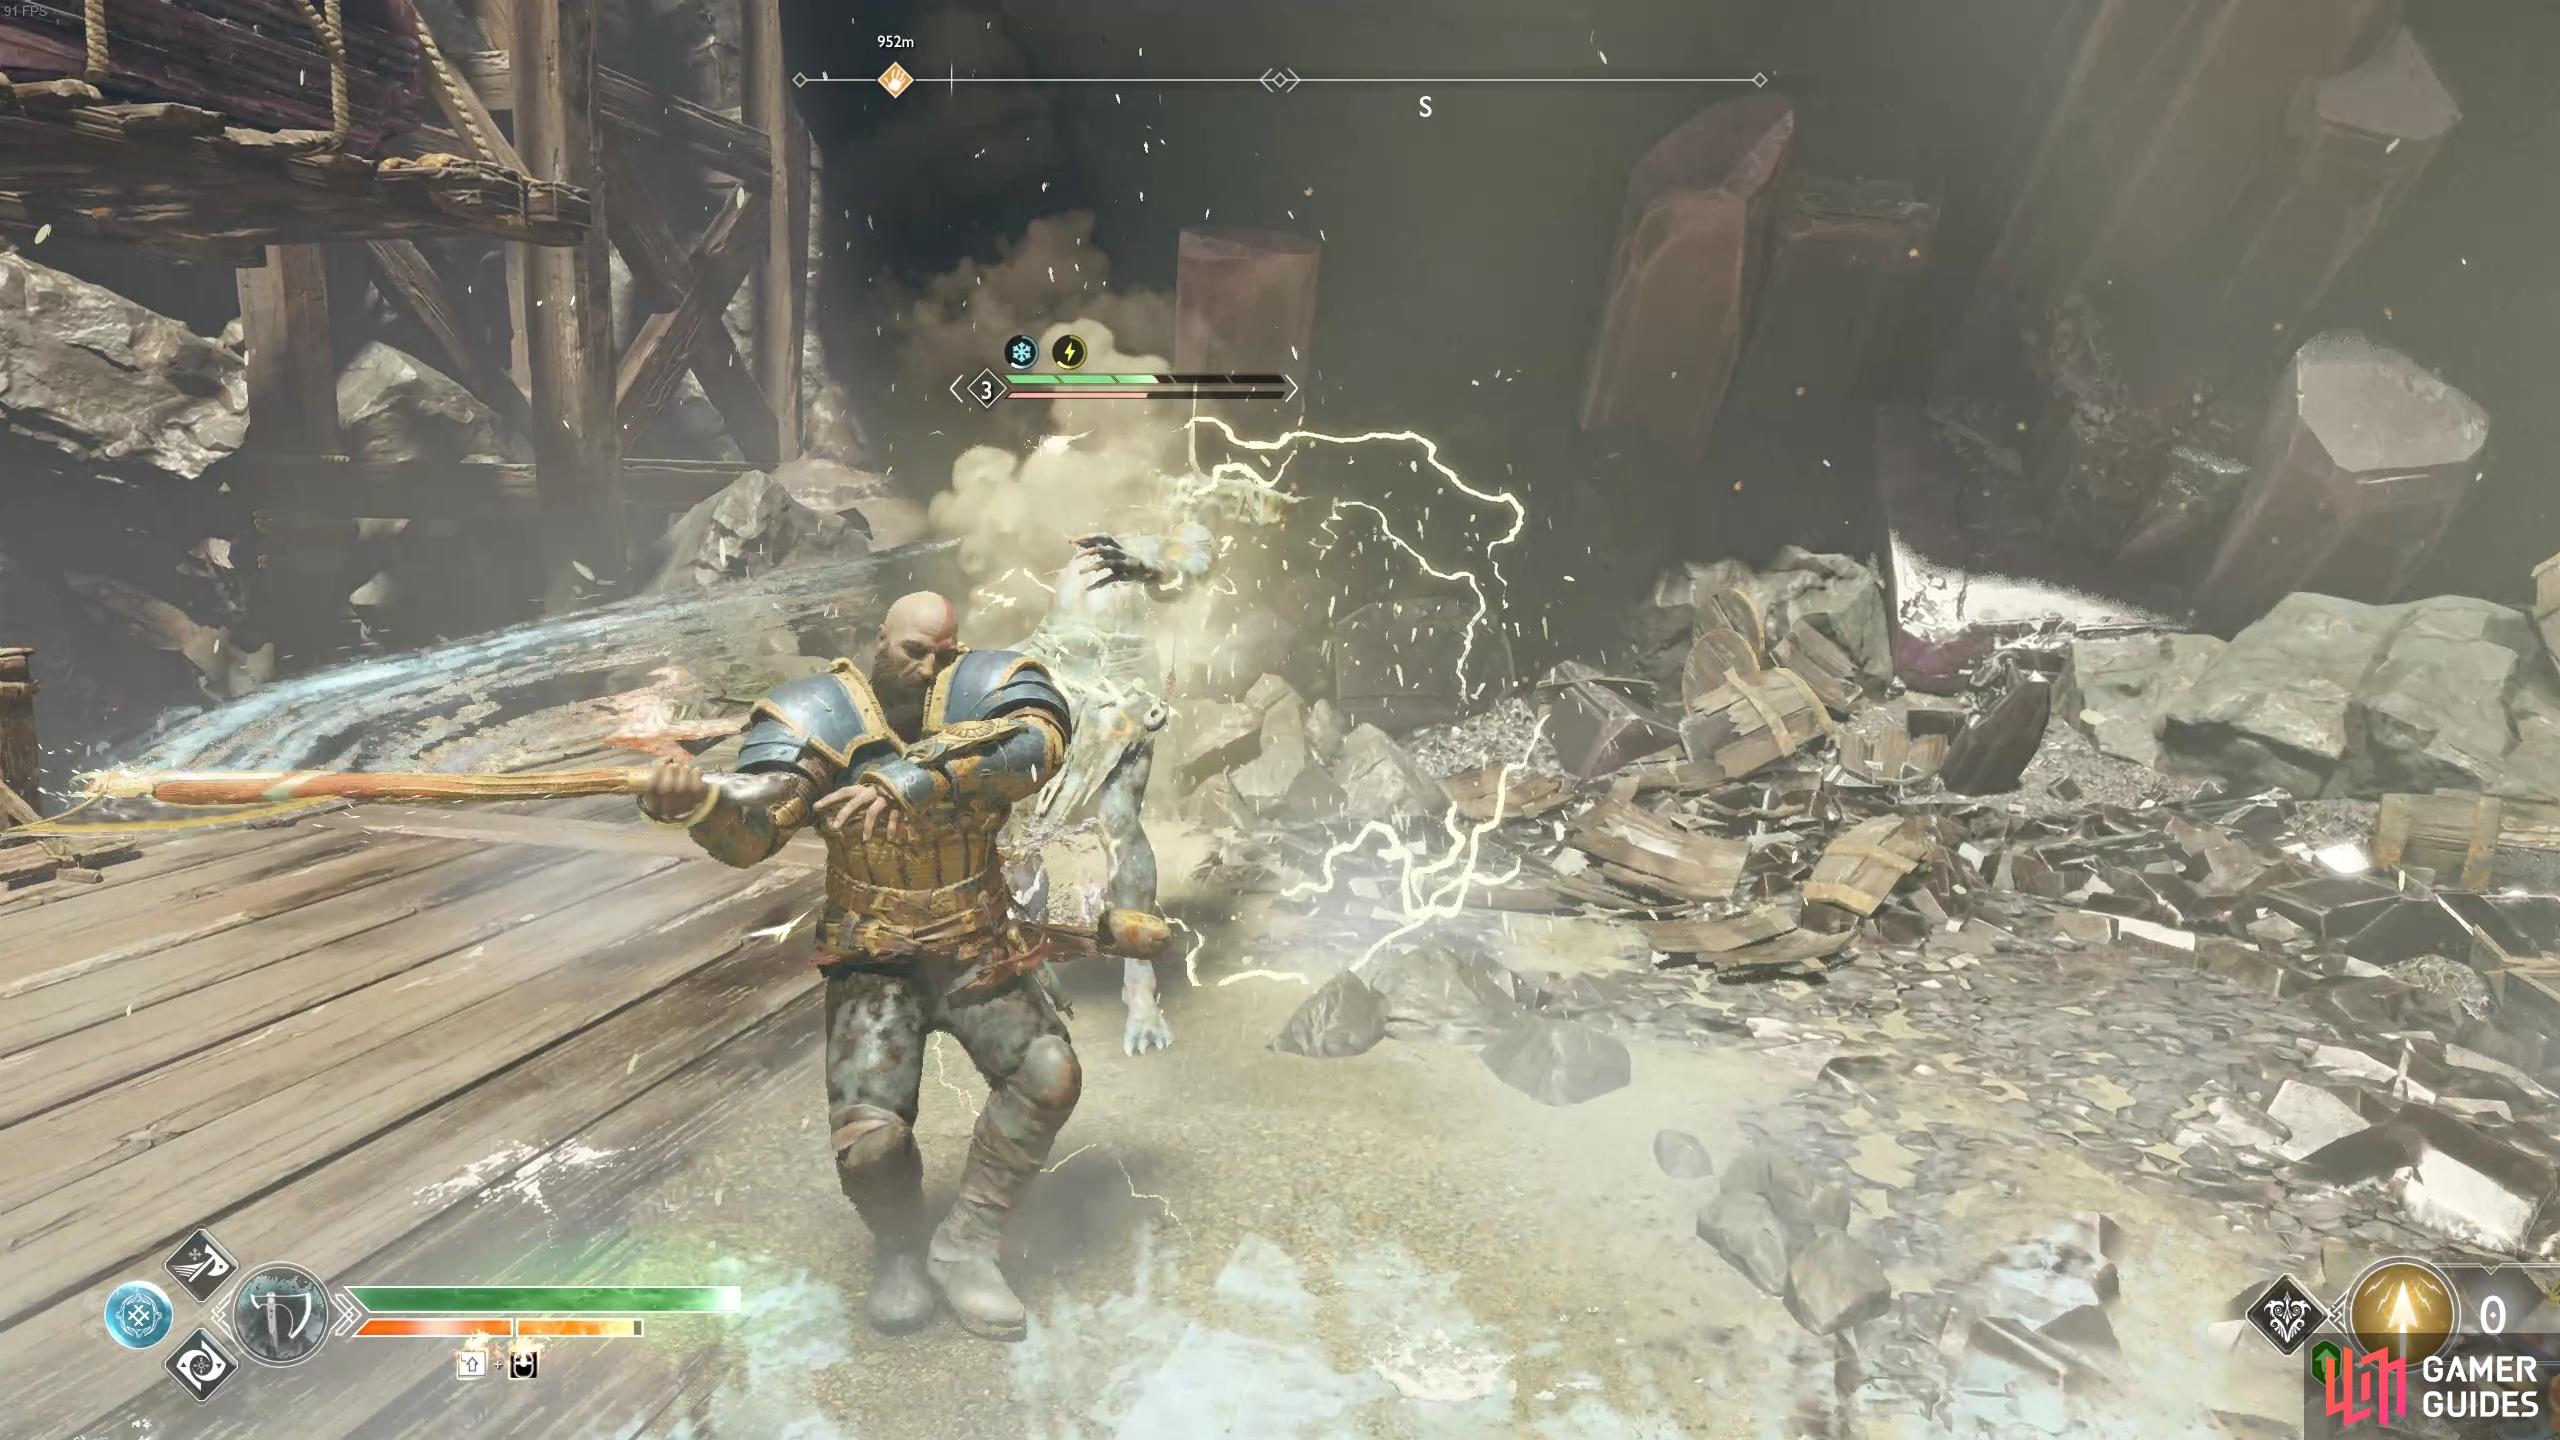 Use Shock Arrows to pin the Elf Lord as you attack in melee.